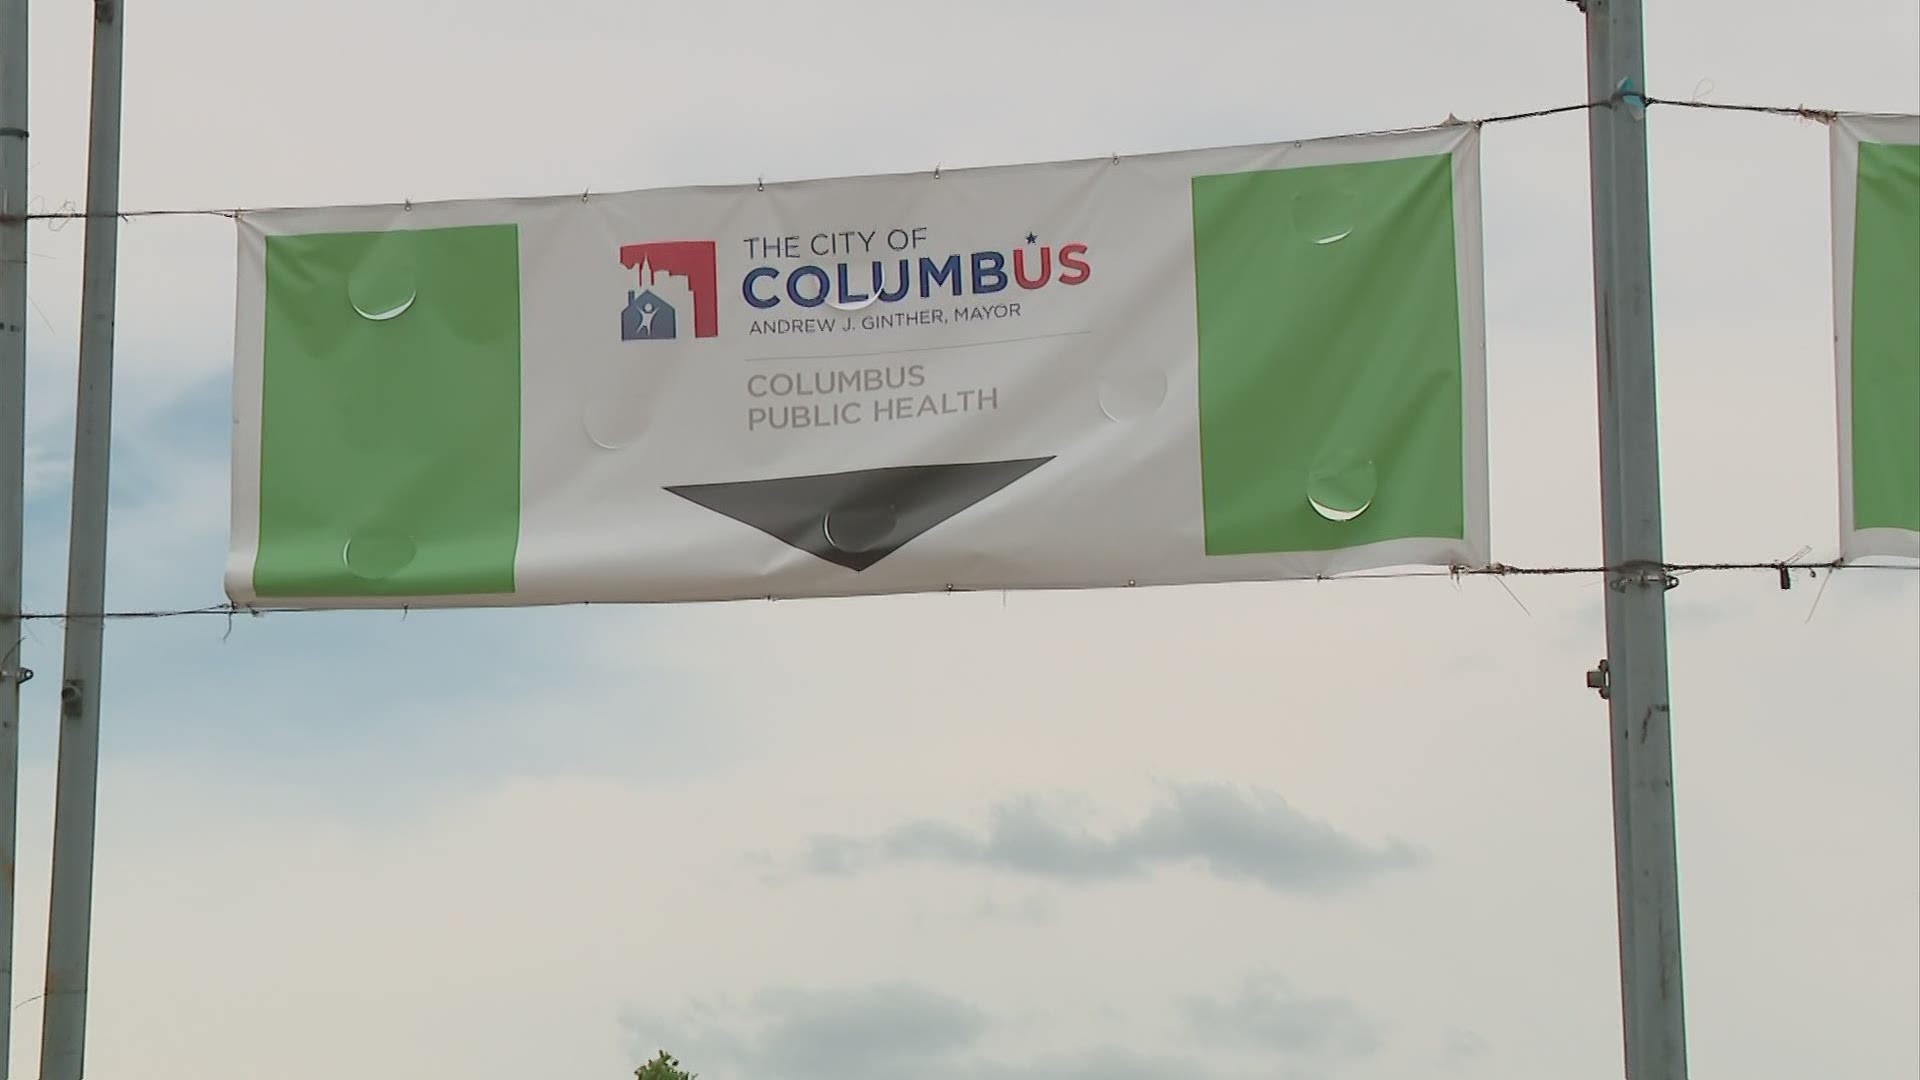 Columbus Public Health will continue to provide vaccinations at the health center as well as use mobile units to reach more people.